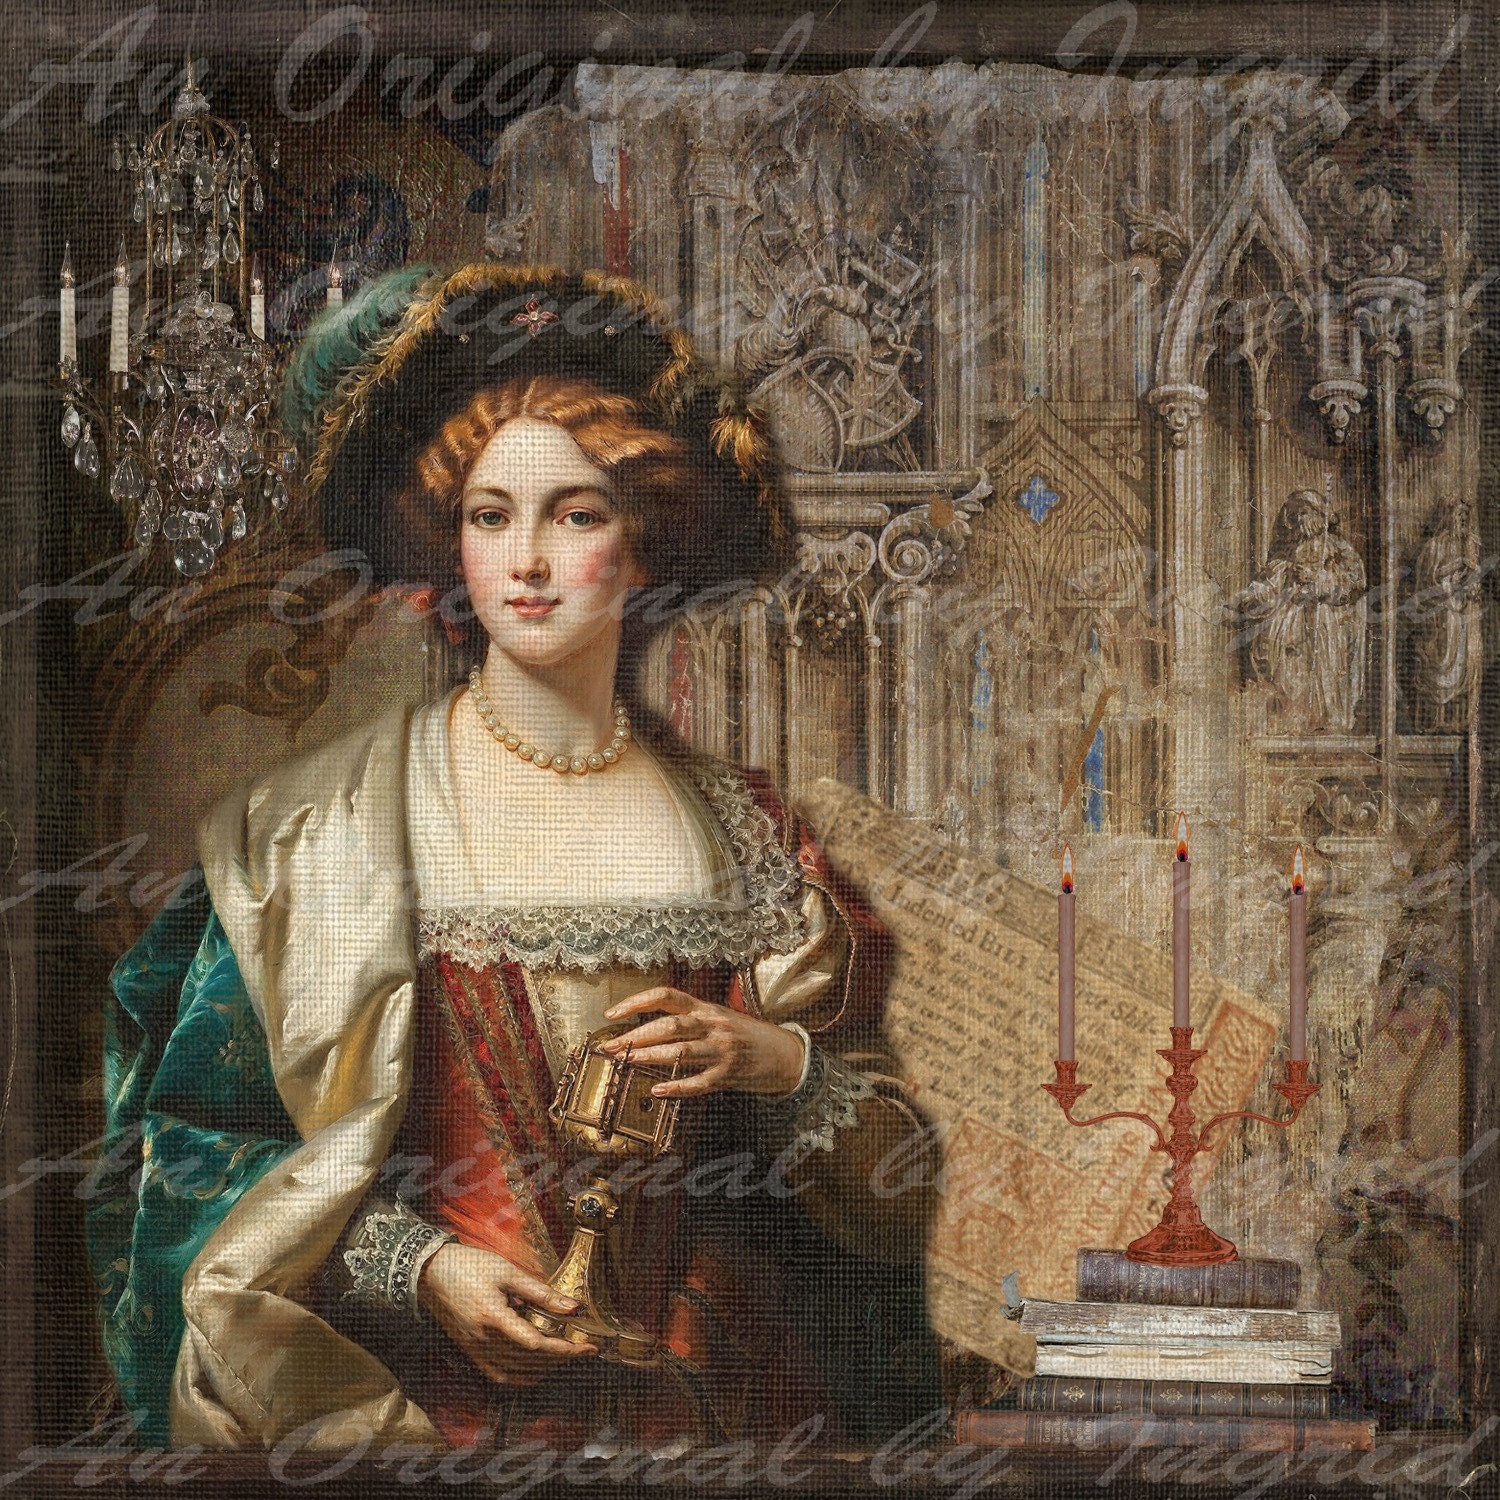 Renaissance Beauty Digital Collage Greeting Card (Suitable for Framing)